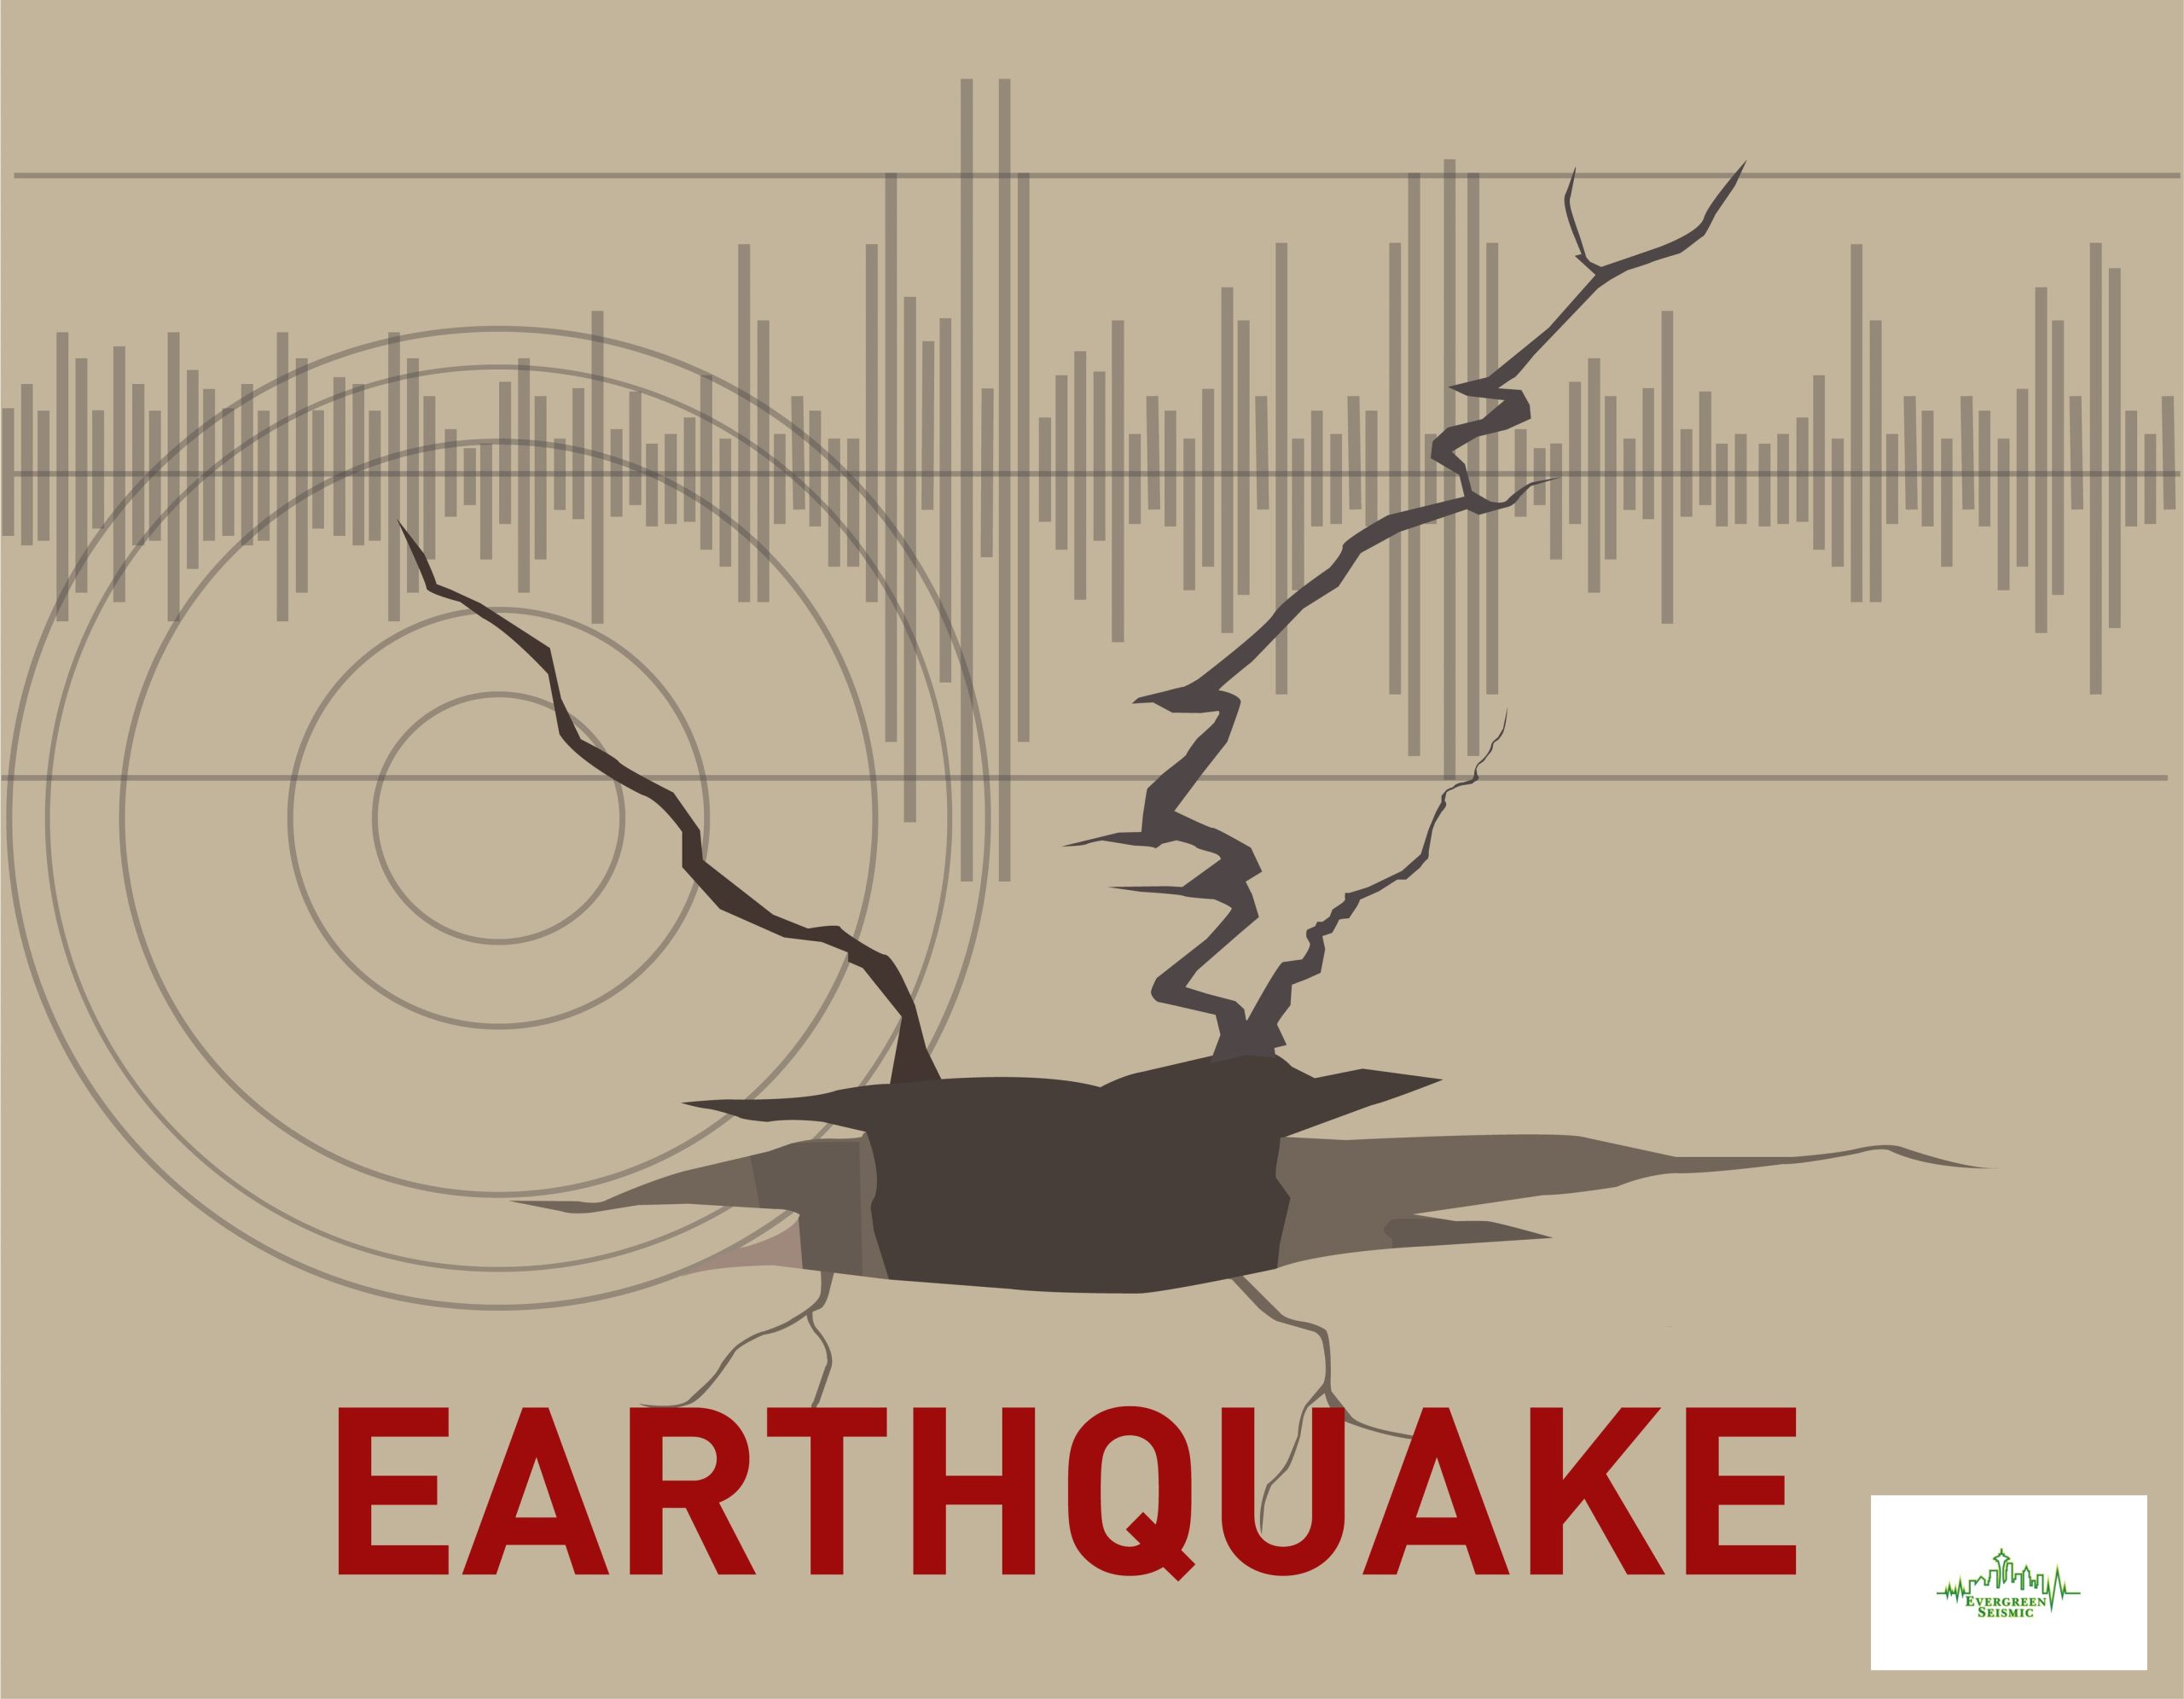 You Don't Need to be an Engineer to Feel Safe: You Need an Earthquake Retrofitting Specialist